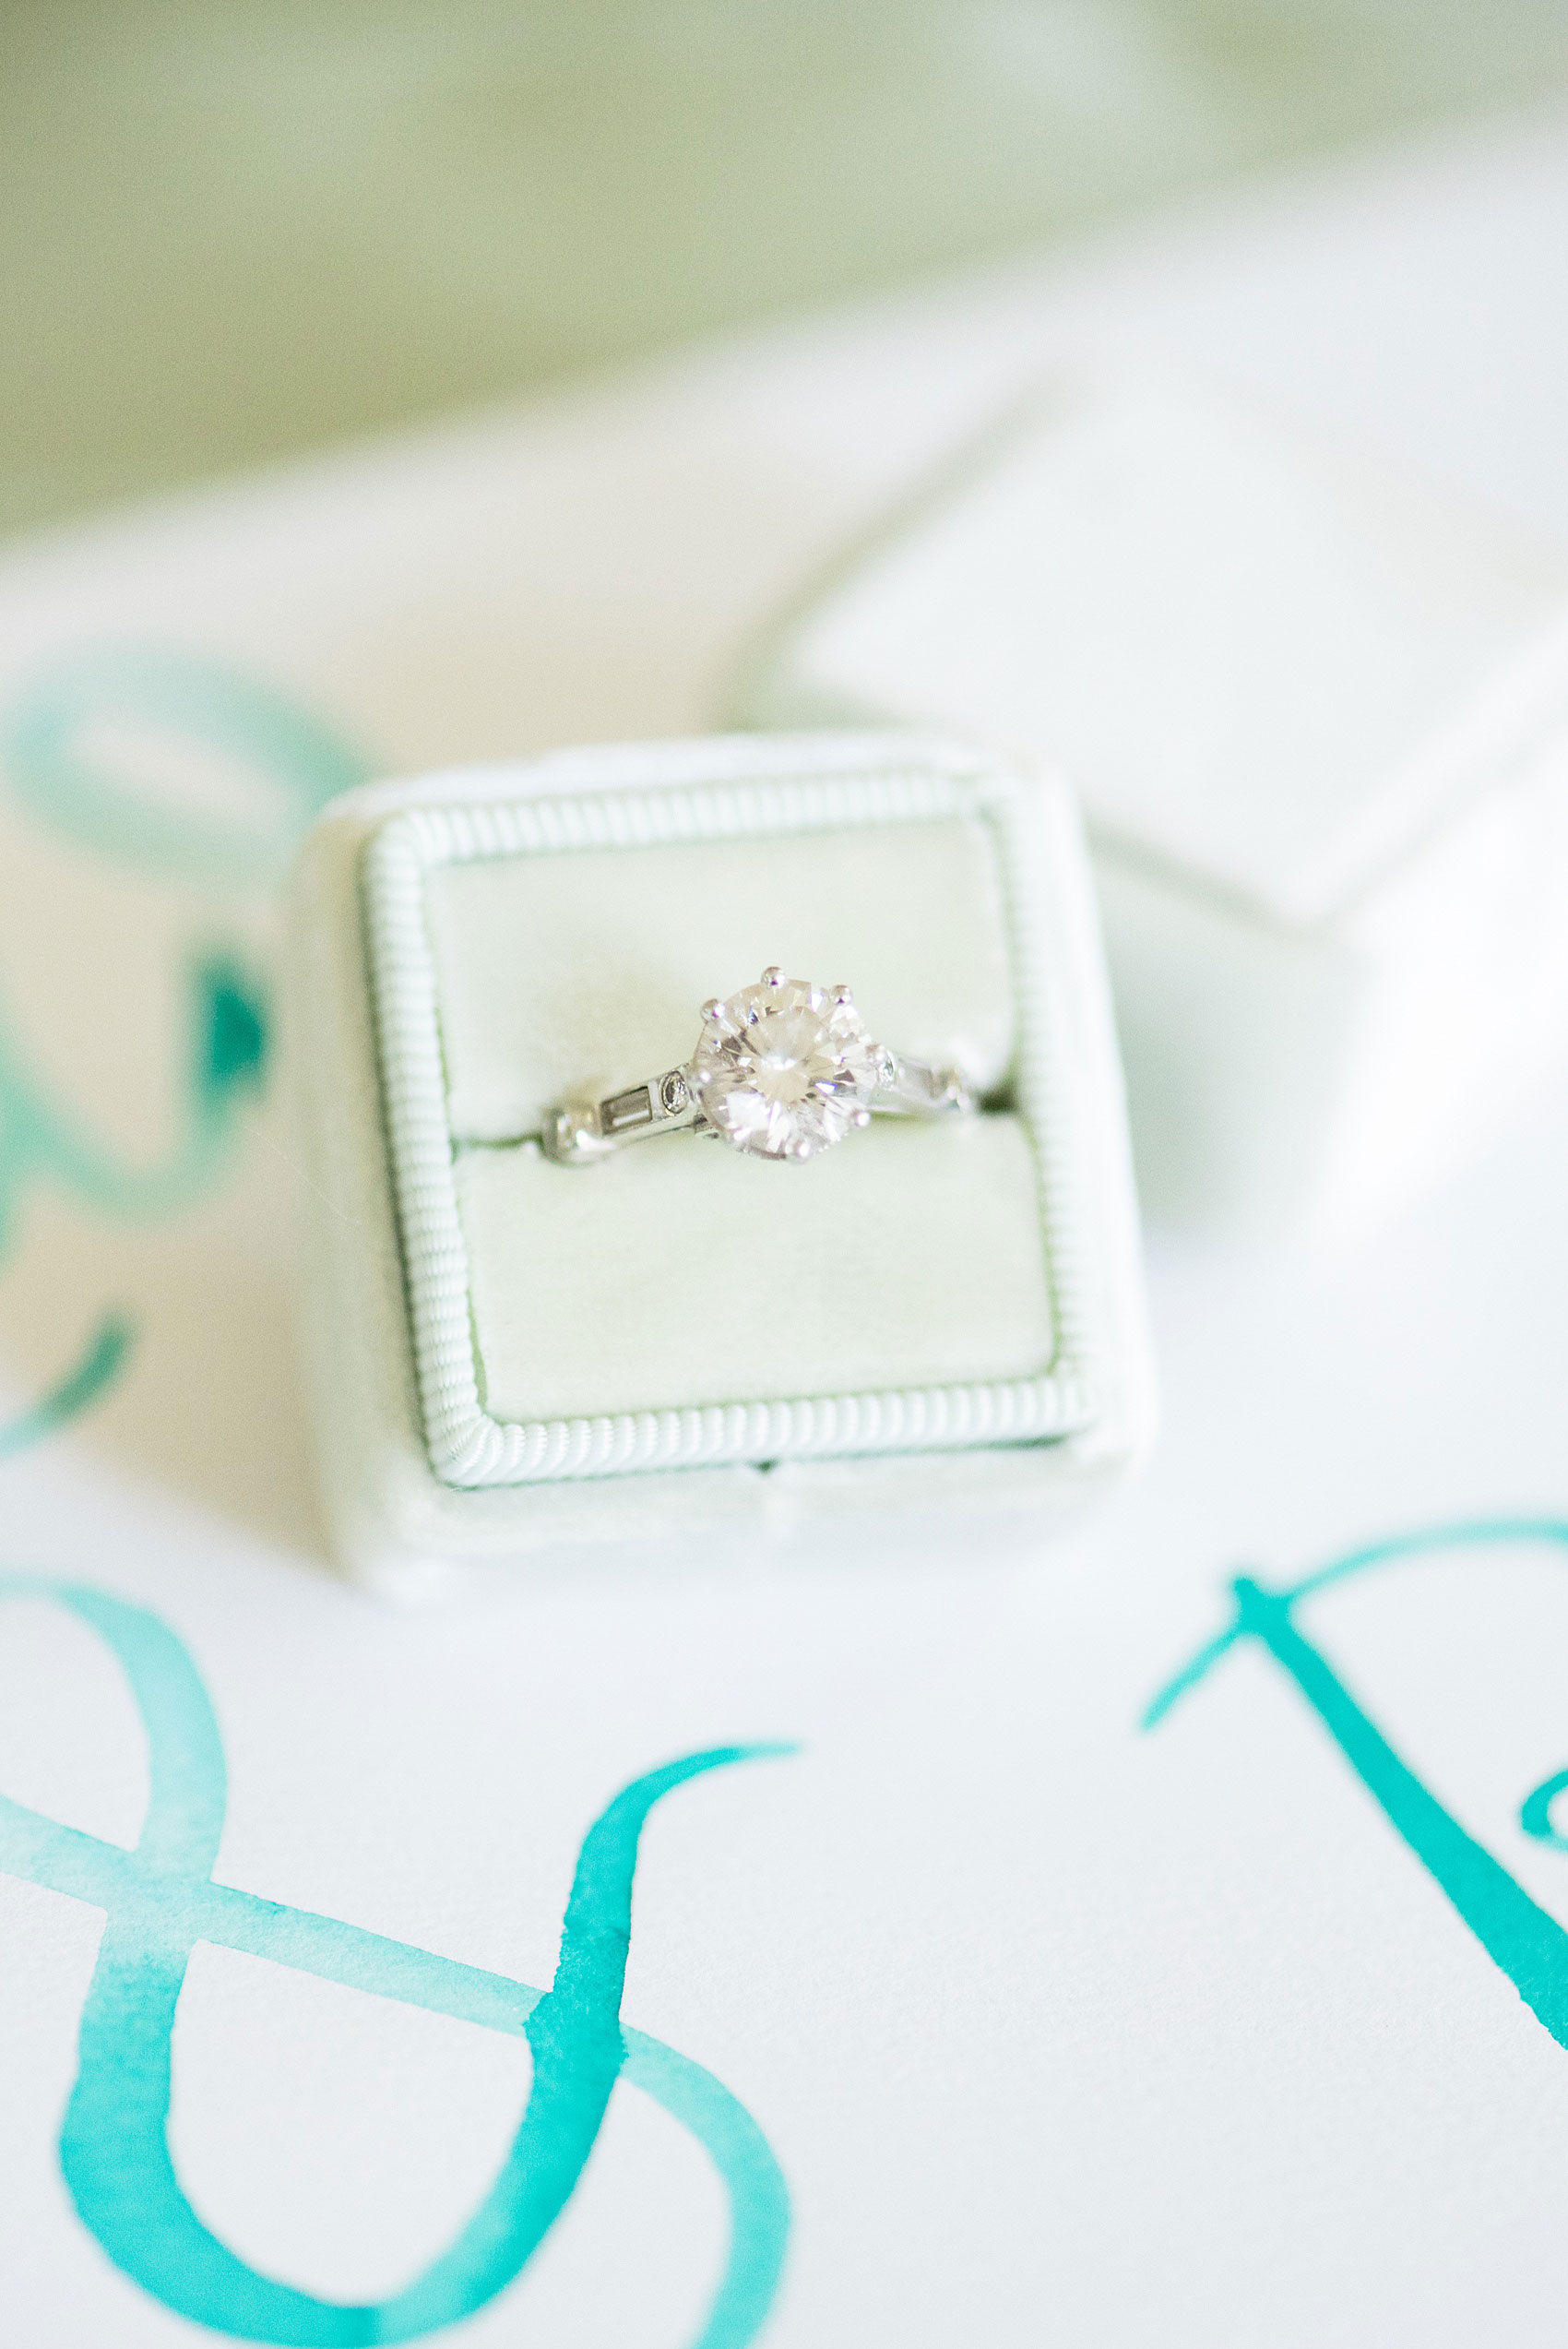 Mikkel Paige Photography photos from a Southwood Estate Wedding in Germantown, New York in the Hudson Valley. Picture of the bride's engagement ring in a mint green Mrs. Box.